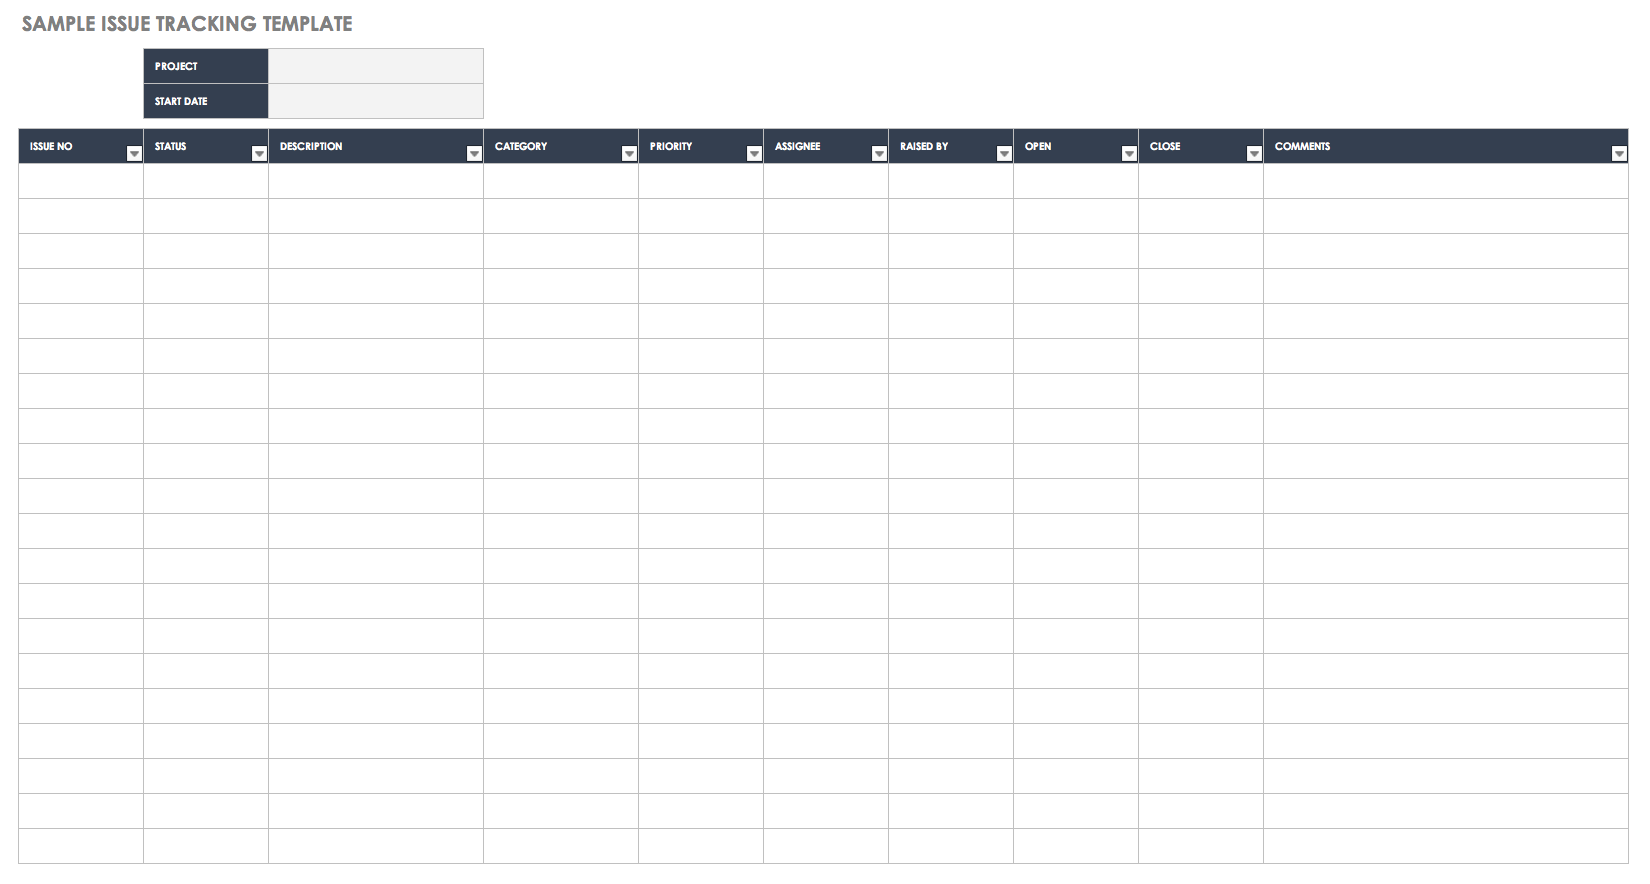 Sample Issue Tracking Template